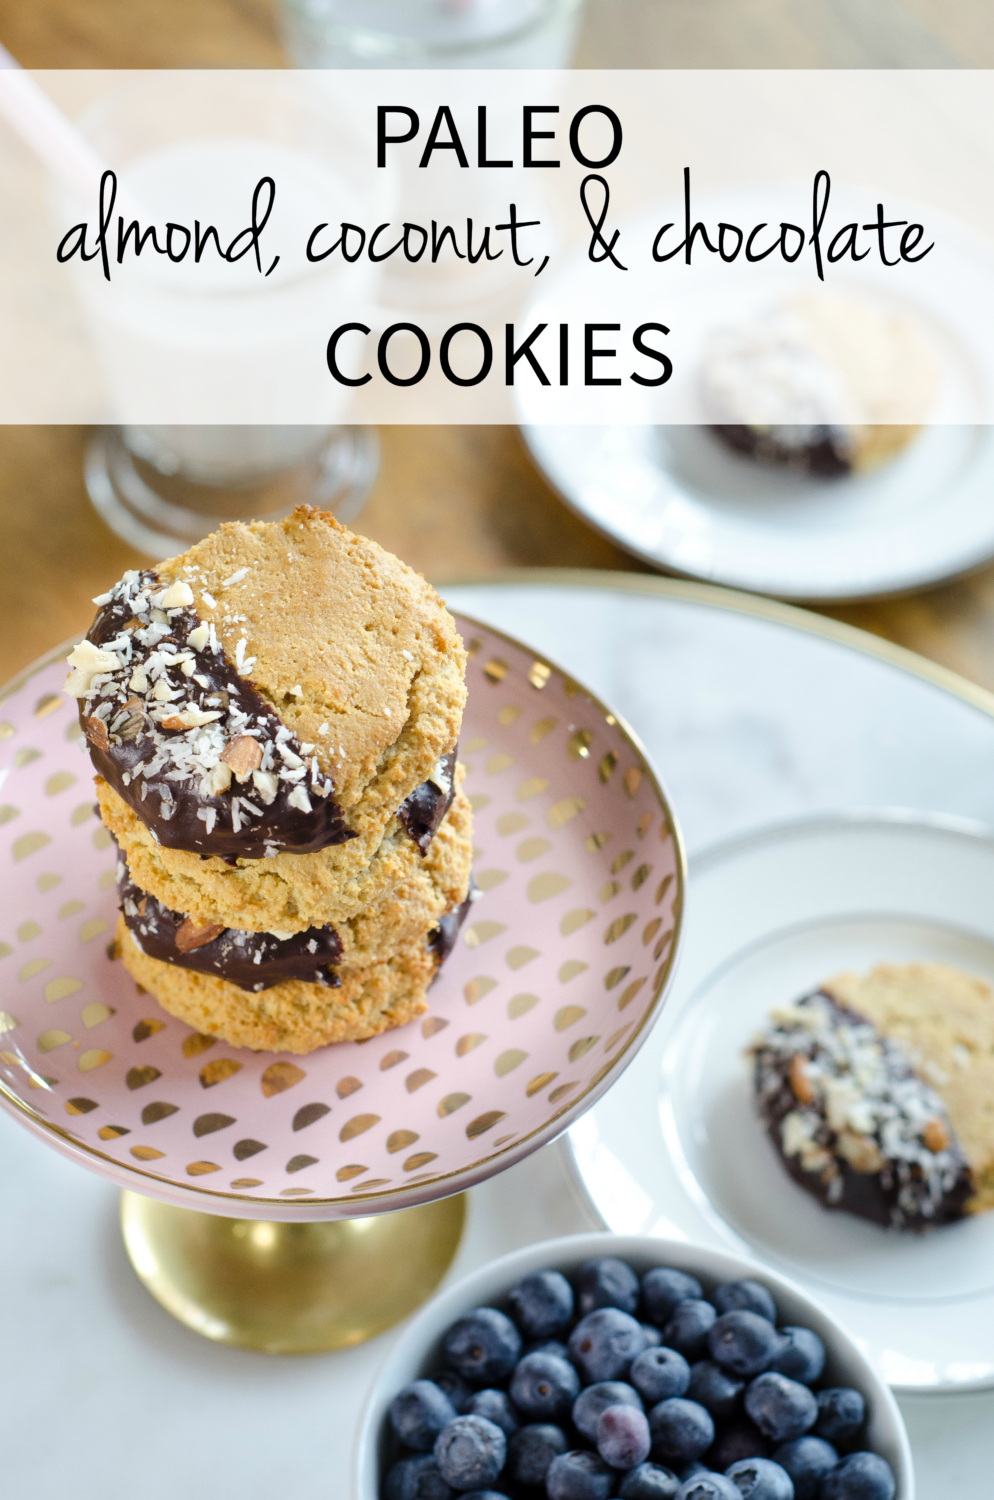 A paleo cookie recipe so delicious you'll forget you're eating healthy! Almond, coconut, and chocolate cookies for those looking for a healthy cookie recipe or just a little something sweet and tasty!